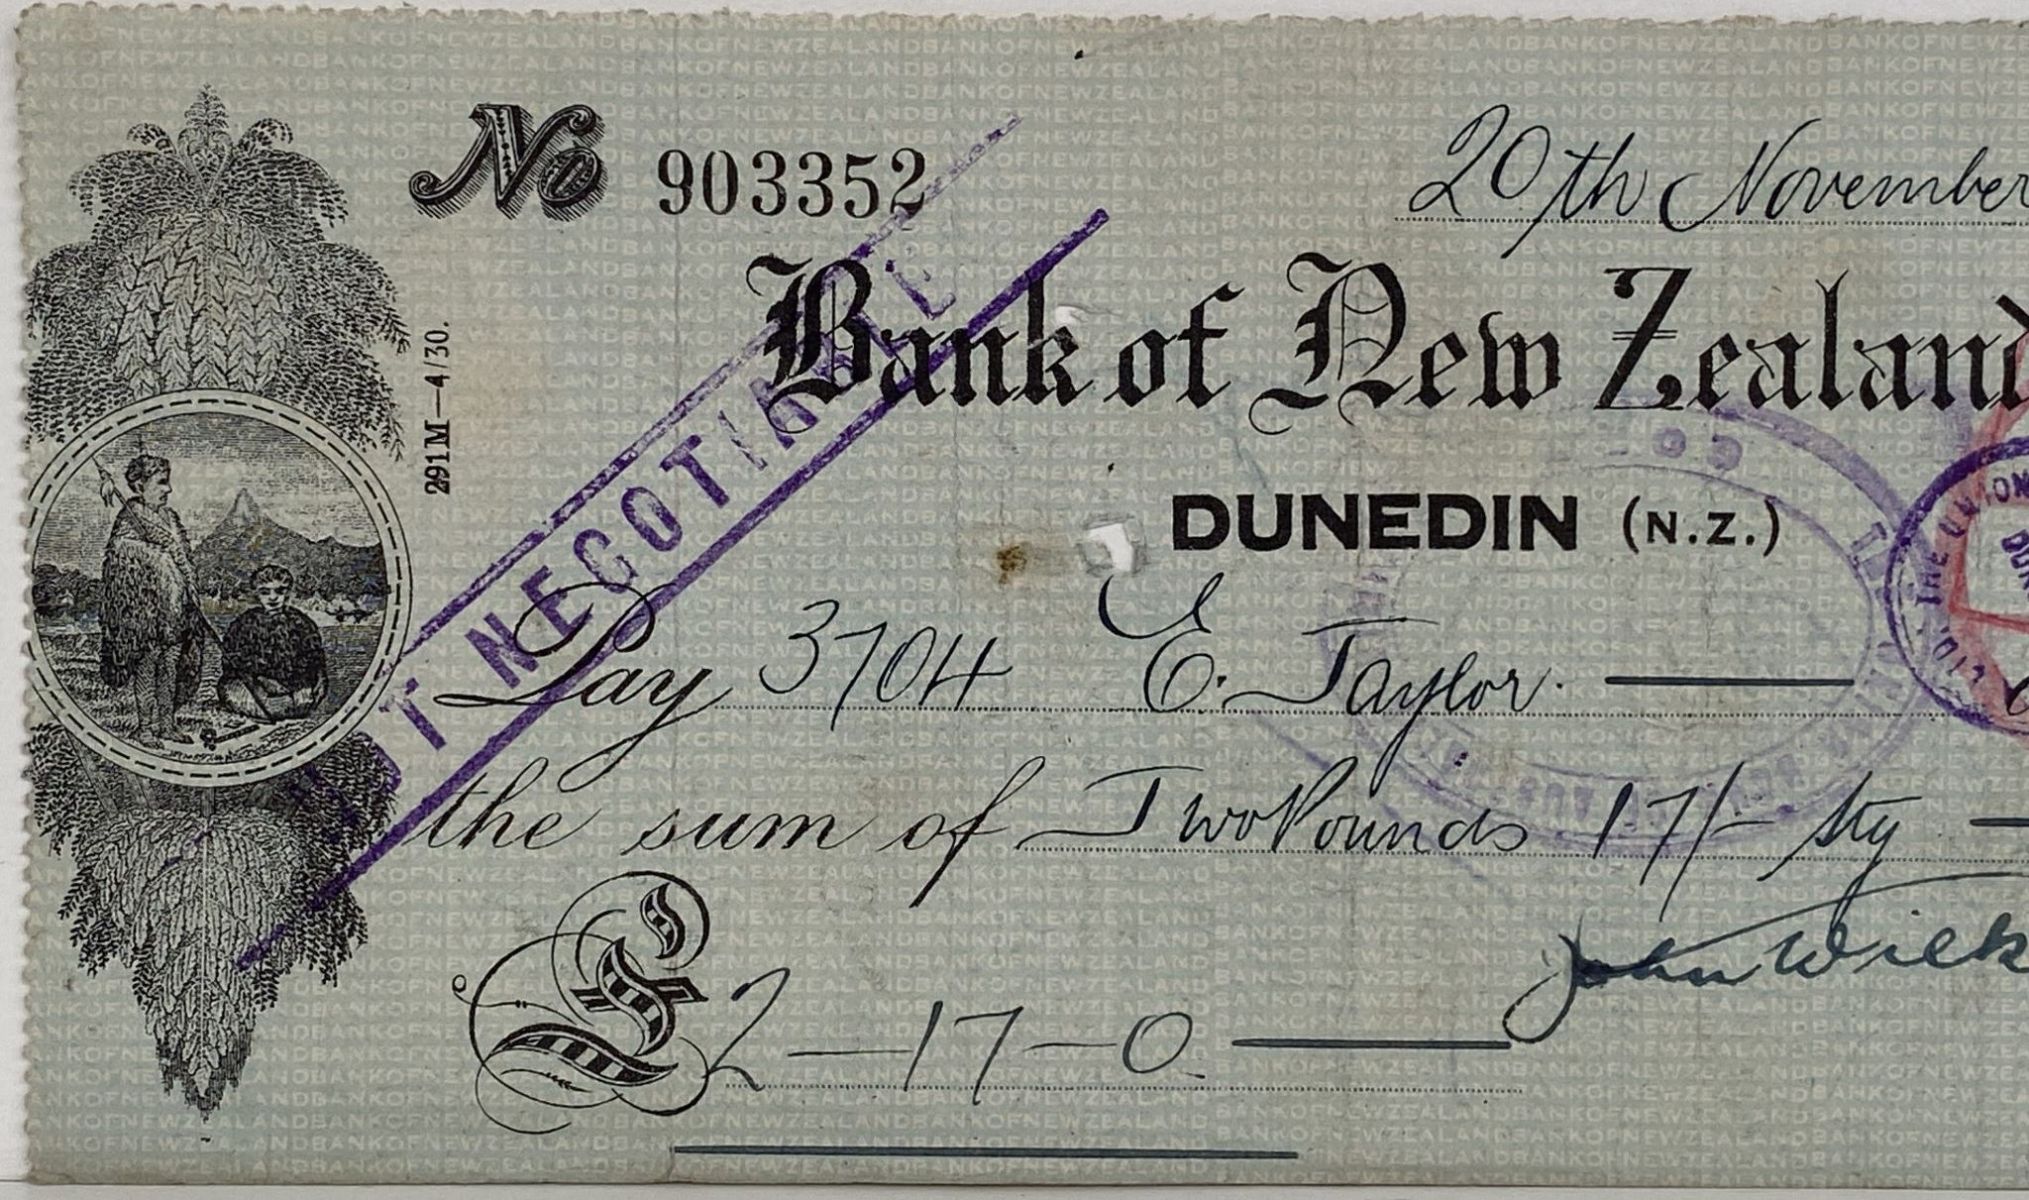 OLD BANKING MEMORABILIA: Bank cheque issued by BNZ Bank, Dunedin 1930